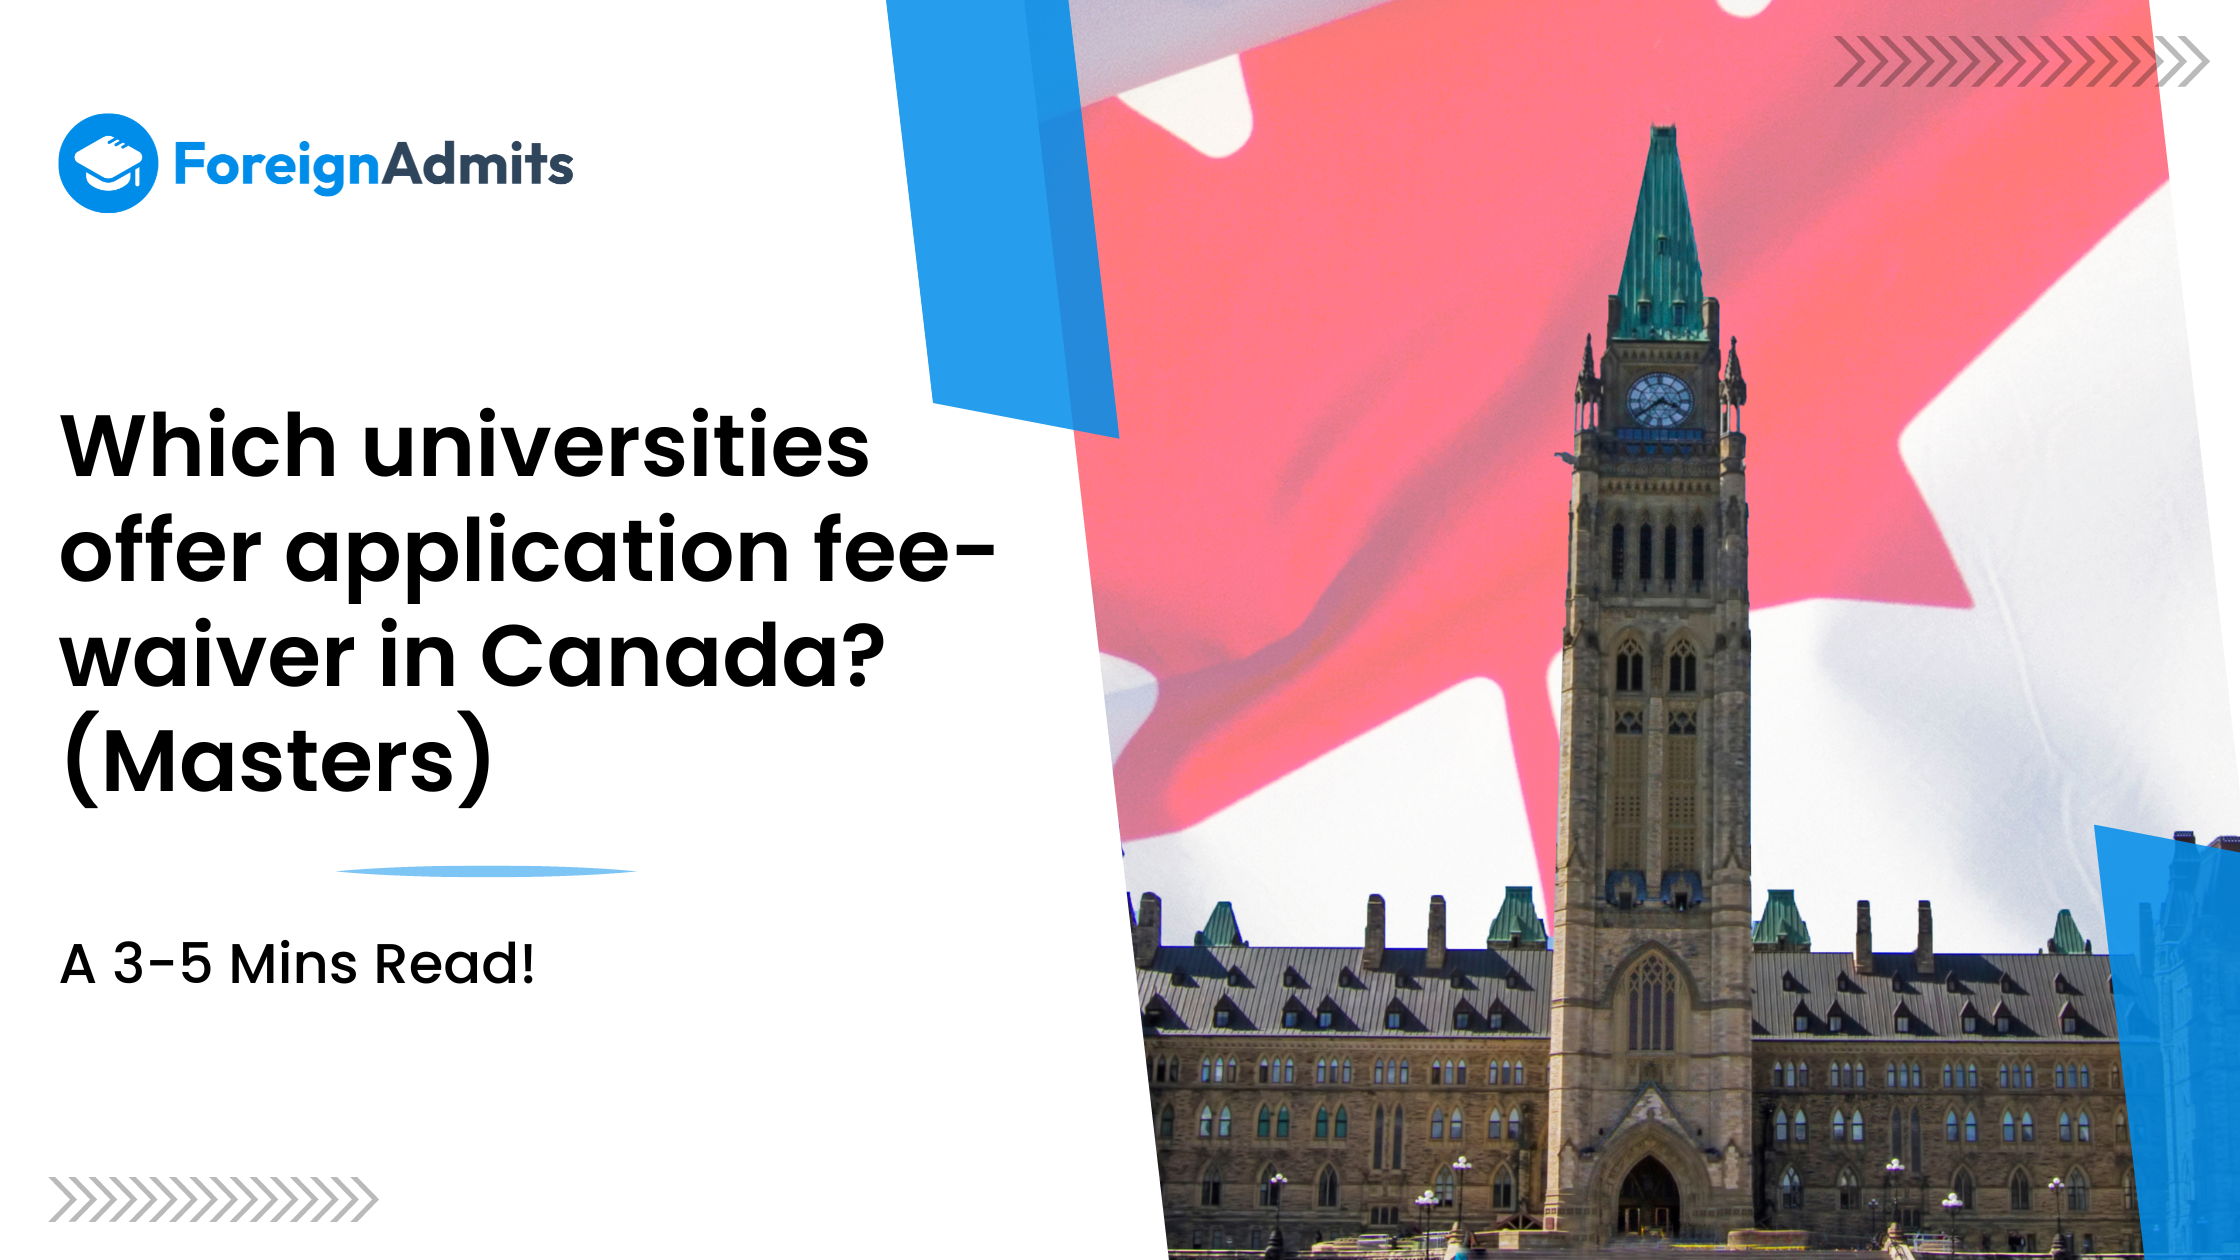 Which universities offer waiver of application fees in Canada? (Masters)